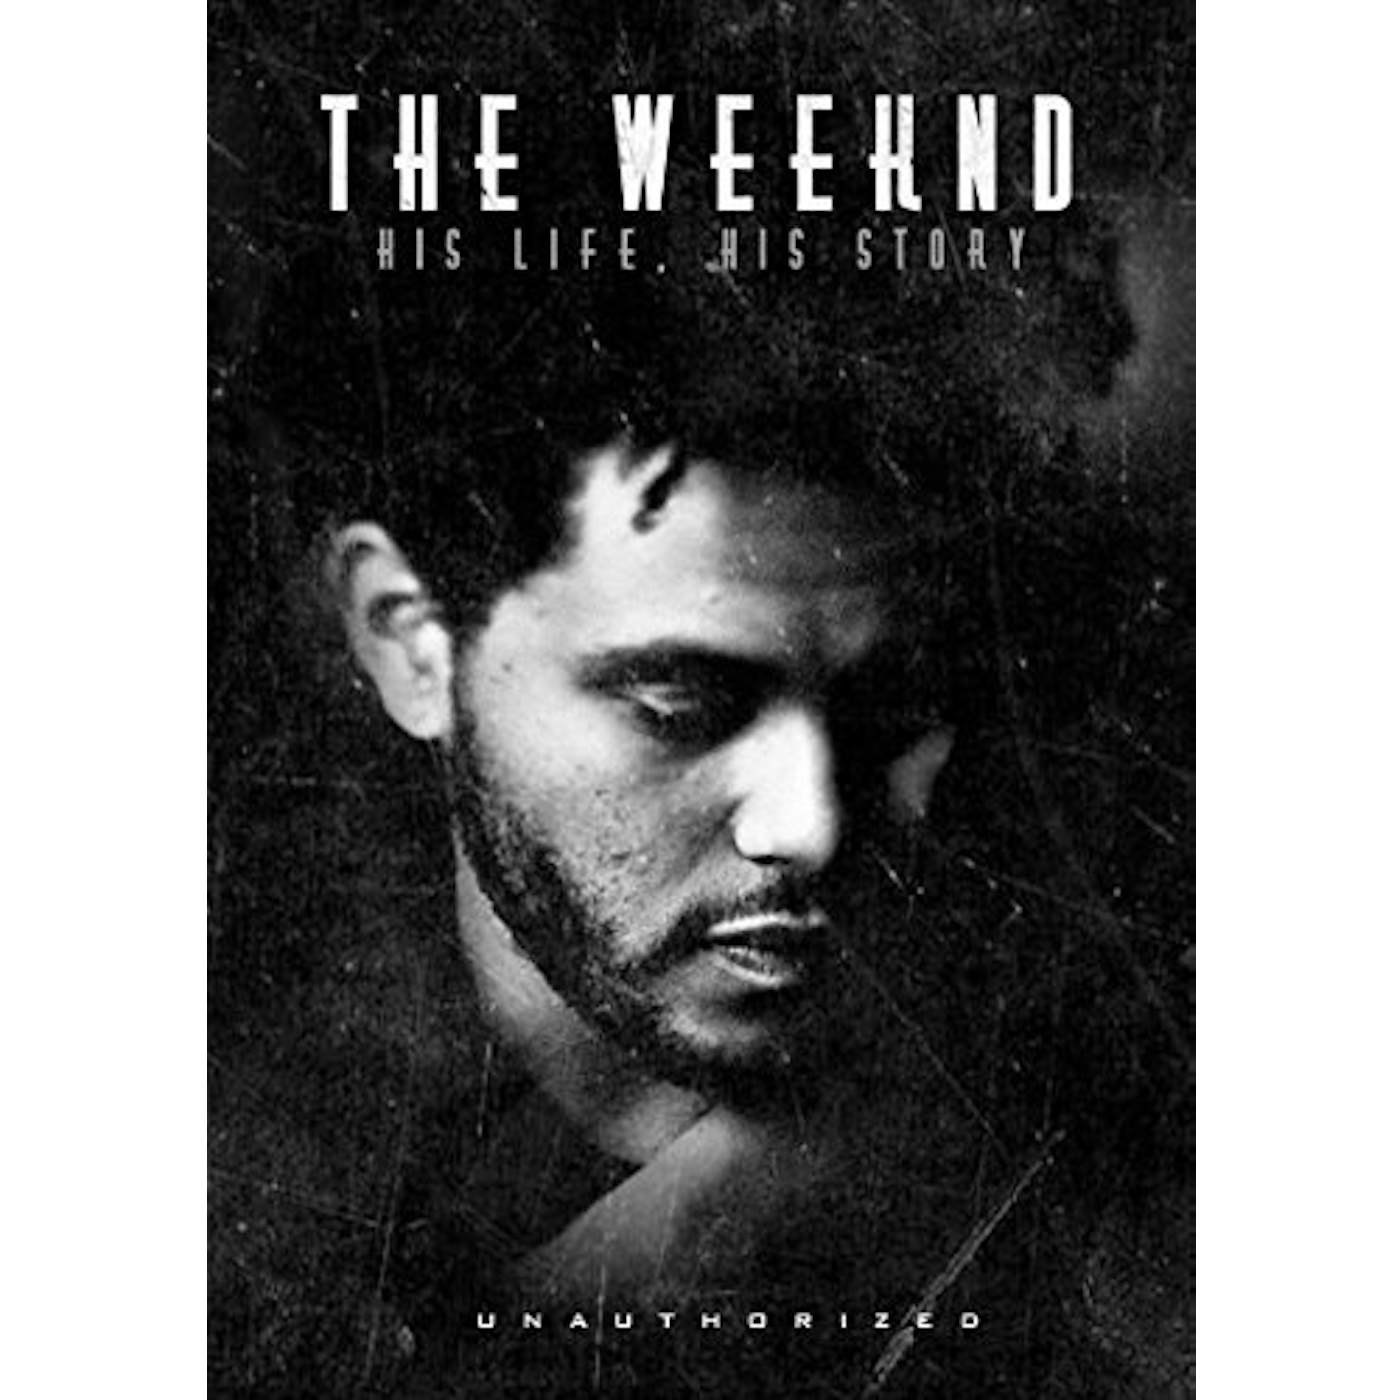 The Weeknd: HIS LIFE HIS DVD